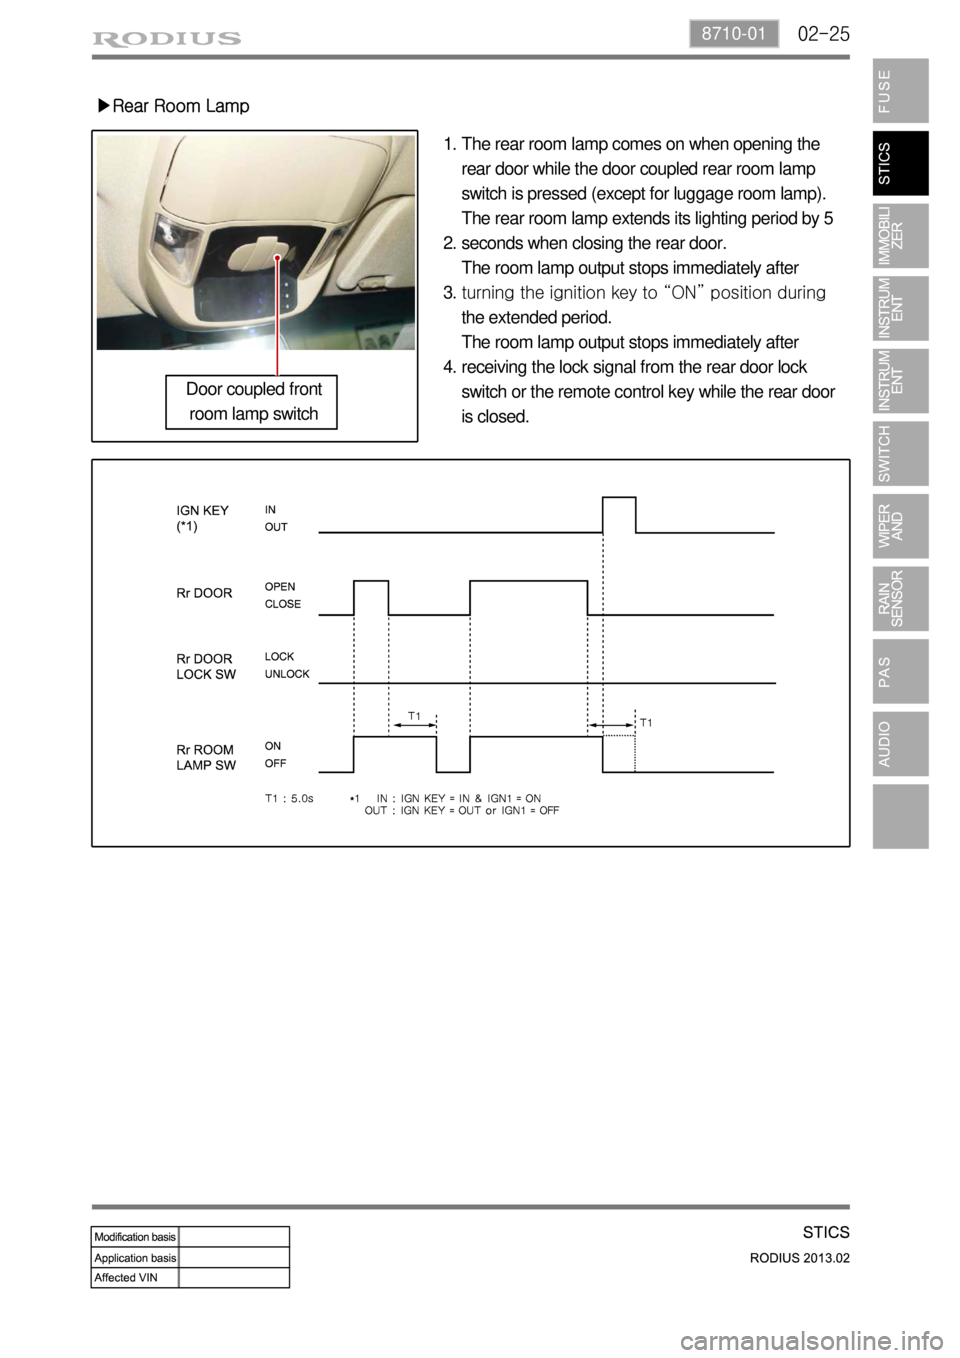 SSANGYONG TURISMO 2013 Owners Guide 02-258710-01
The rear room lamp comes on when opening the 
rear door while the door coupled rear room lamp 
switch is pressed (except for luggage room lamp).
The rear room lamp extends its lighting pe